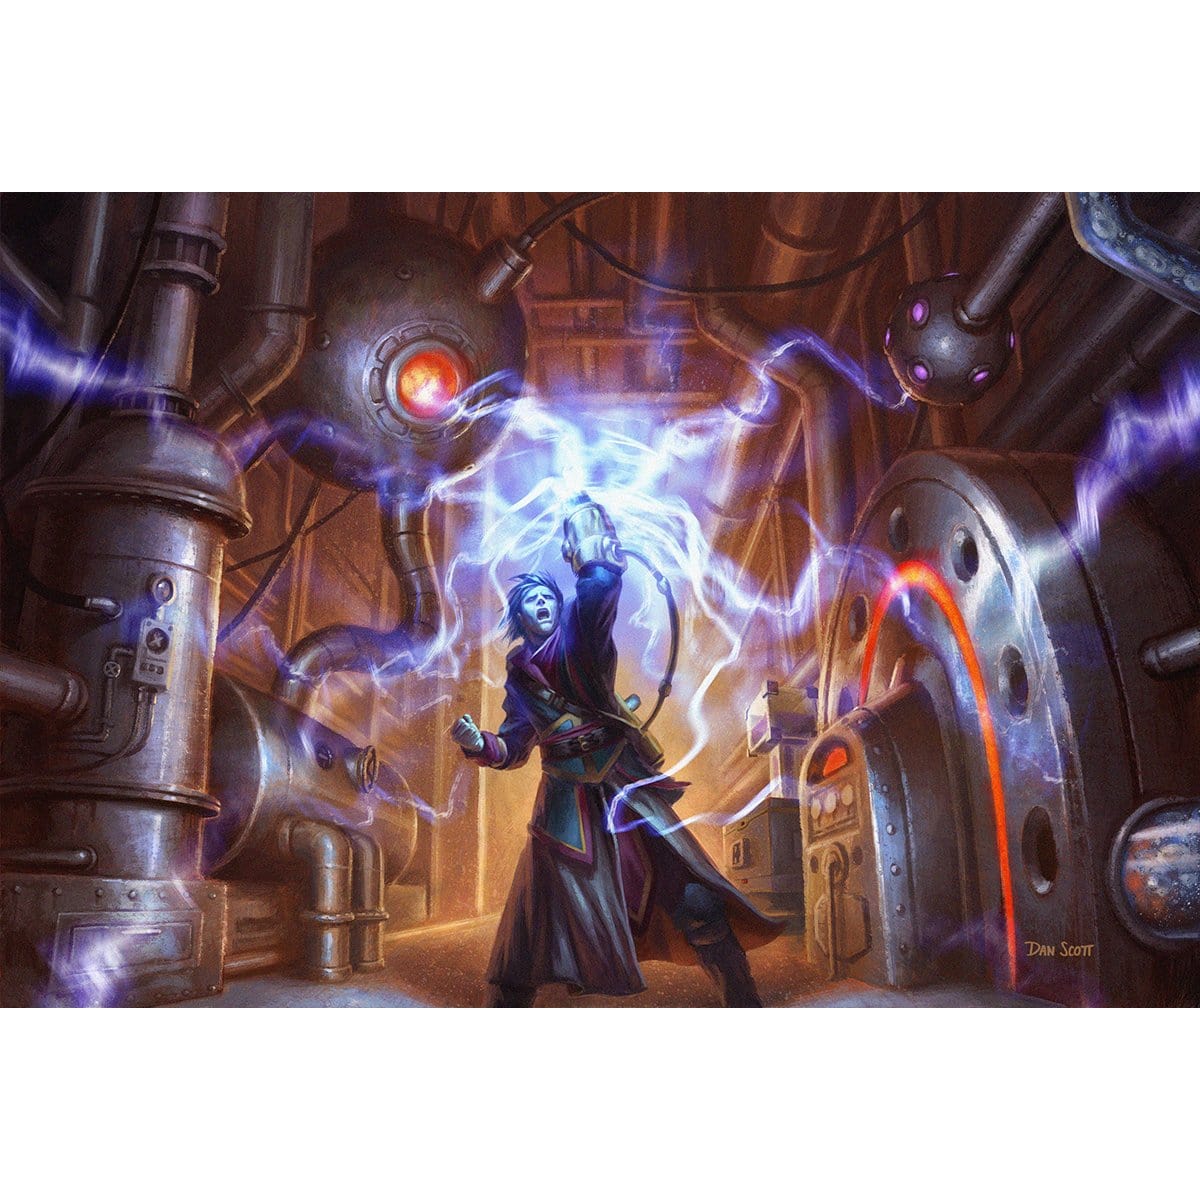 Epic Experiment Print - Print - Original Magic Art - Accessories for Magic the Gathering and other card games